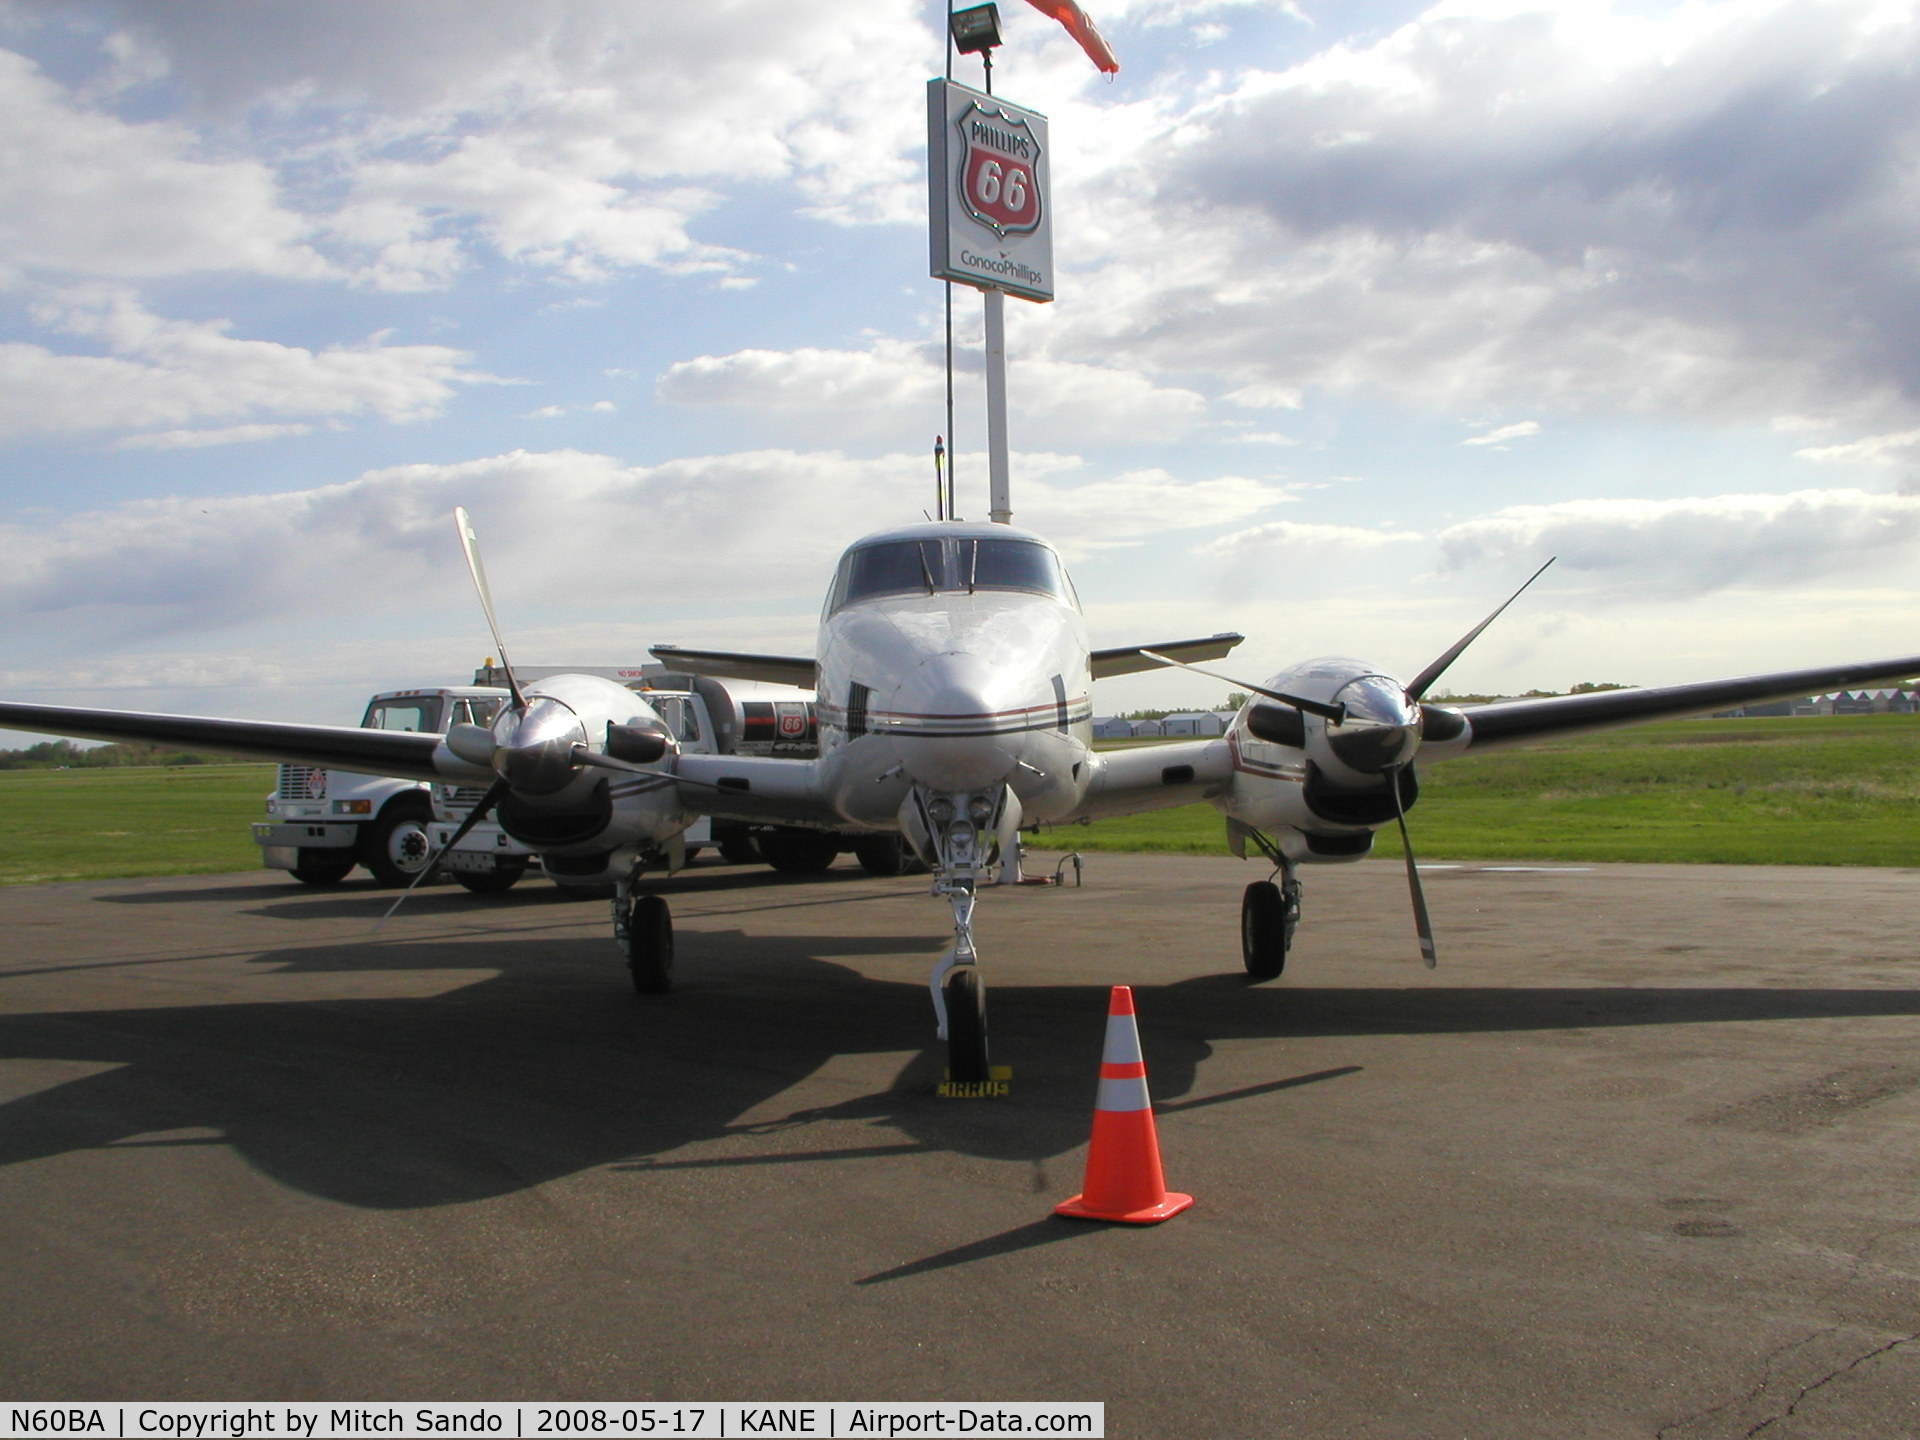 N60BA, Beech E-90 King Air C/N LW-79, Parked on the ramp at Cirrus Flight Operations.